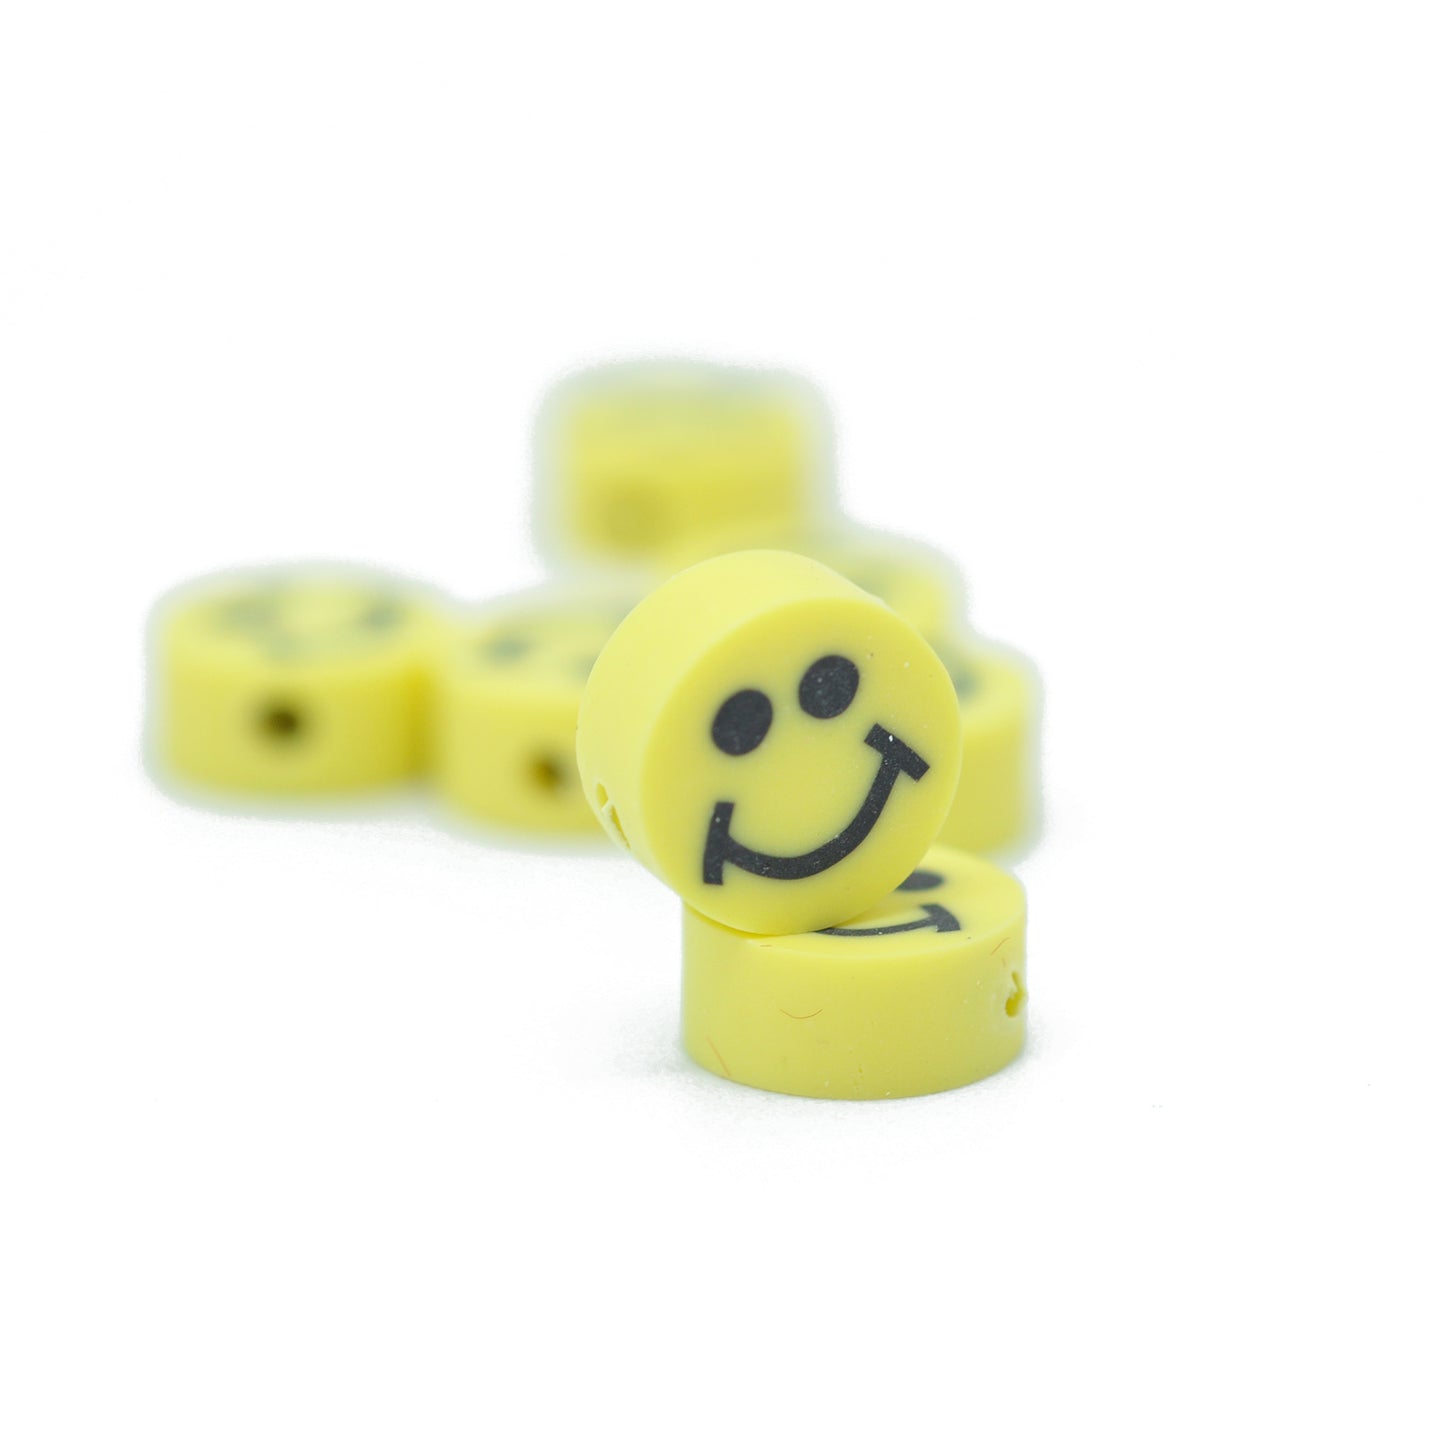 Fimo Smiley Perle / gelb / 10 mm / 10 Stk.